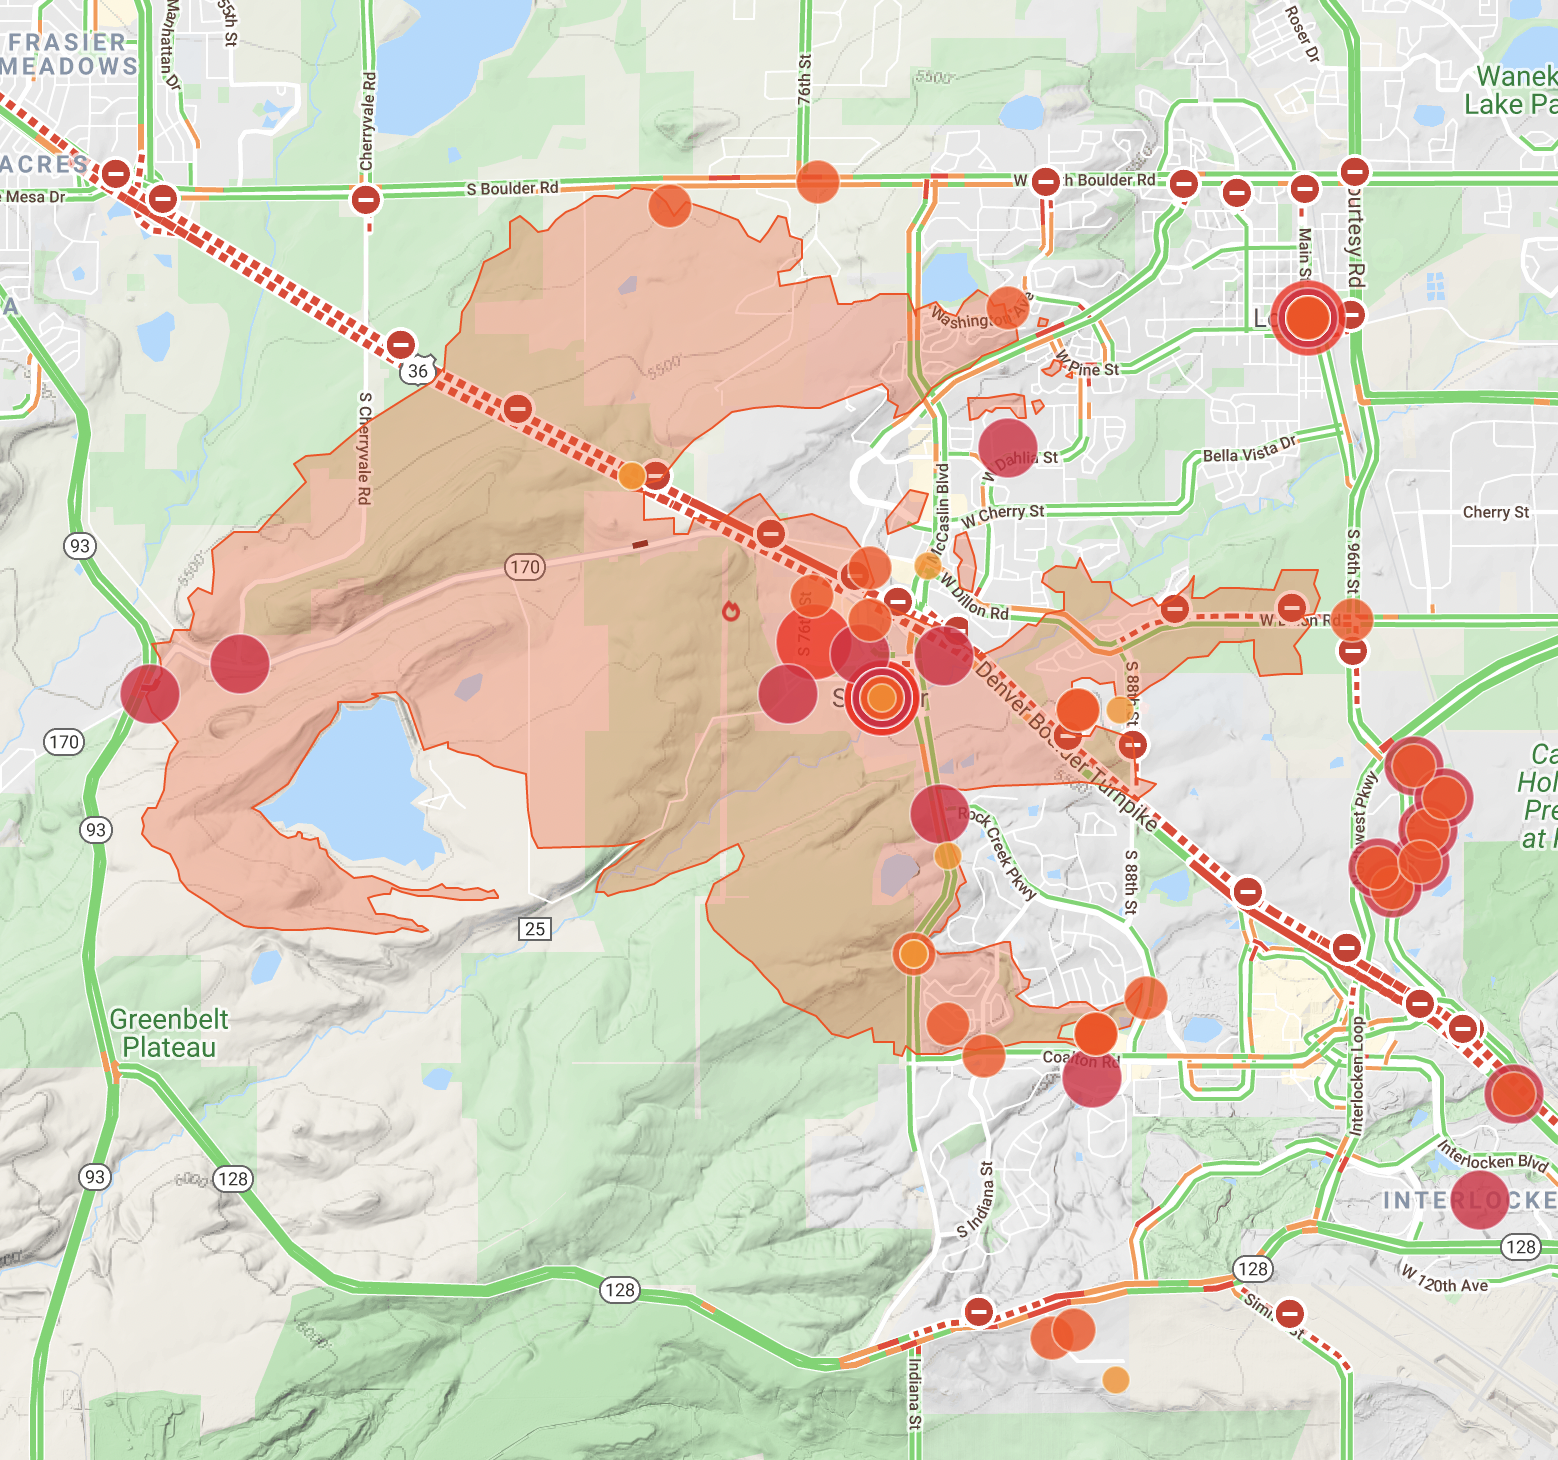 A Factal map image of a wildfire and related incidents near Denver